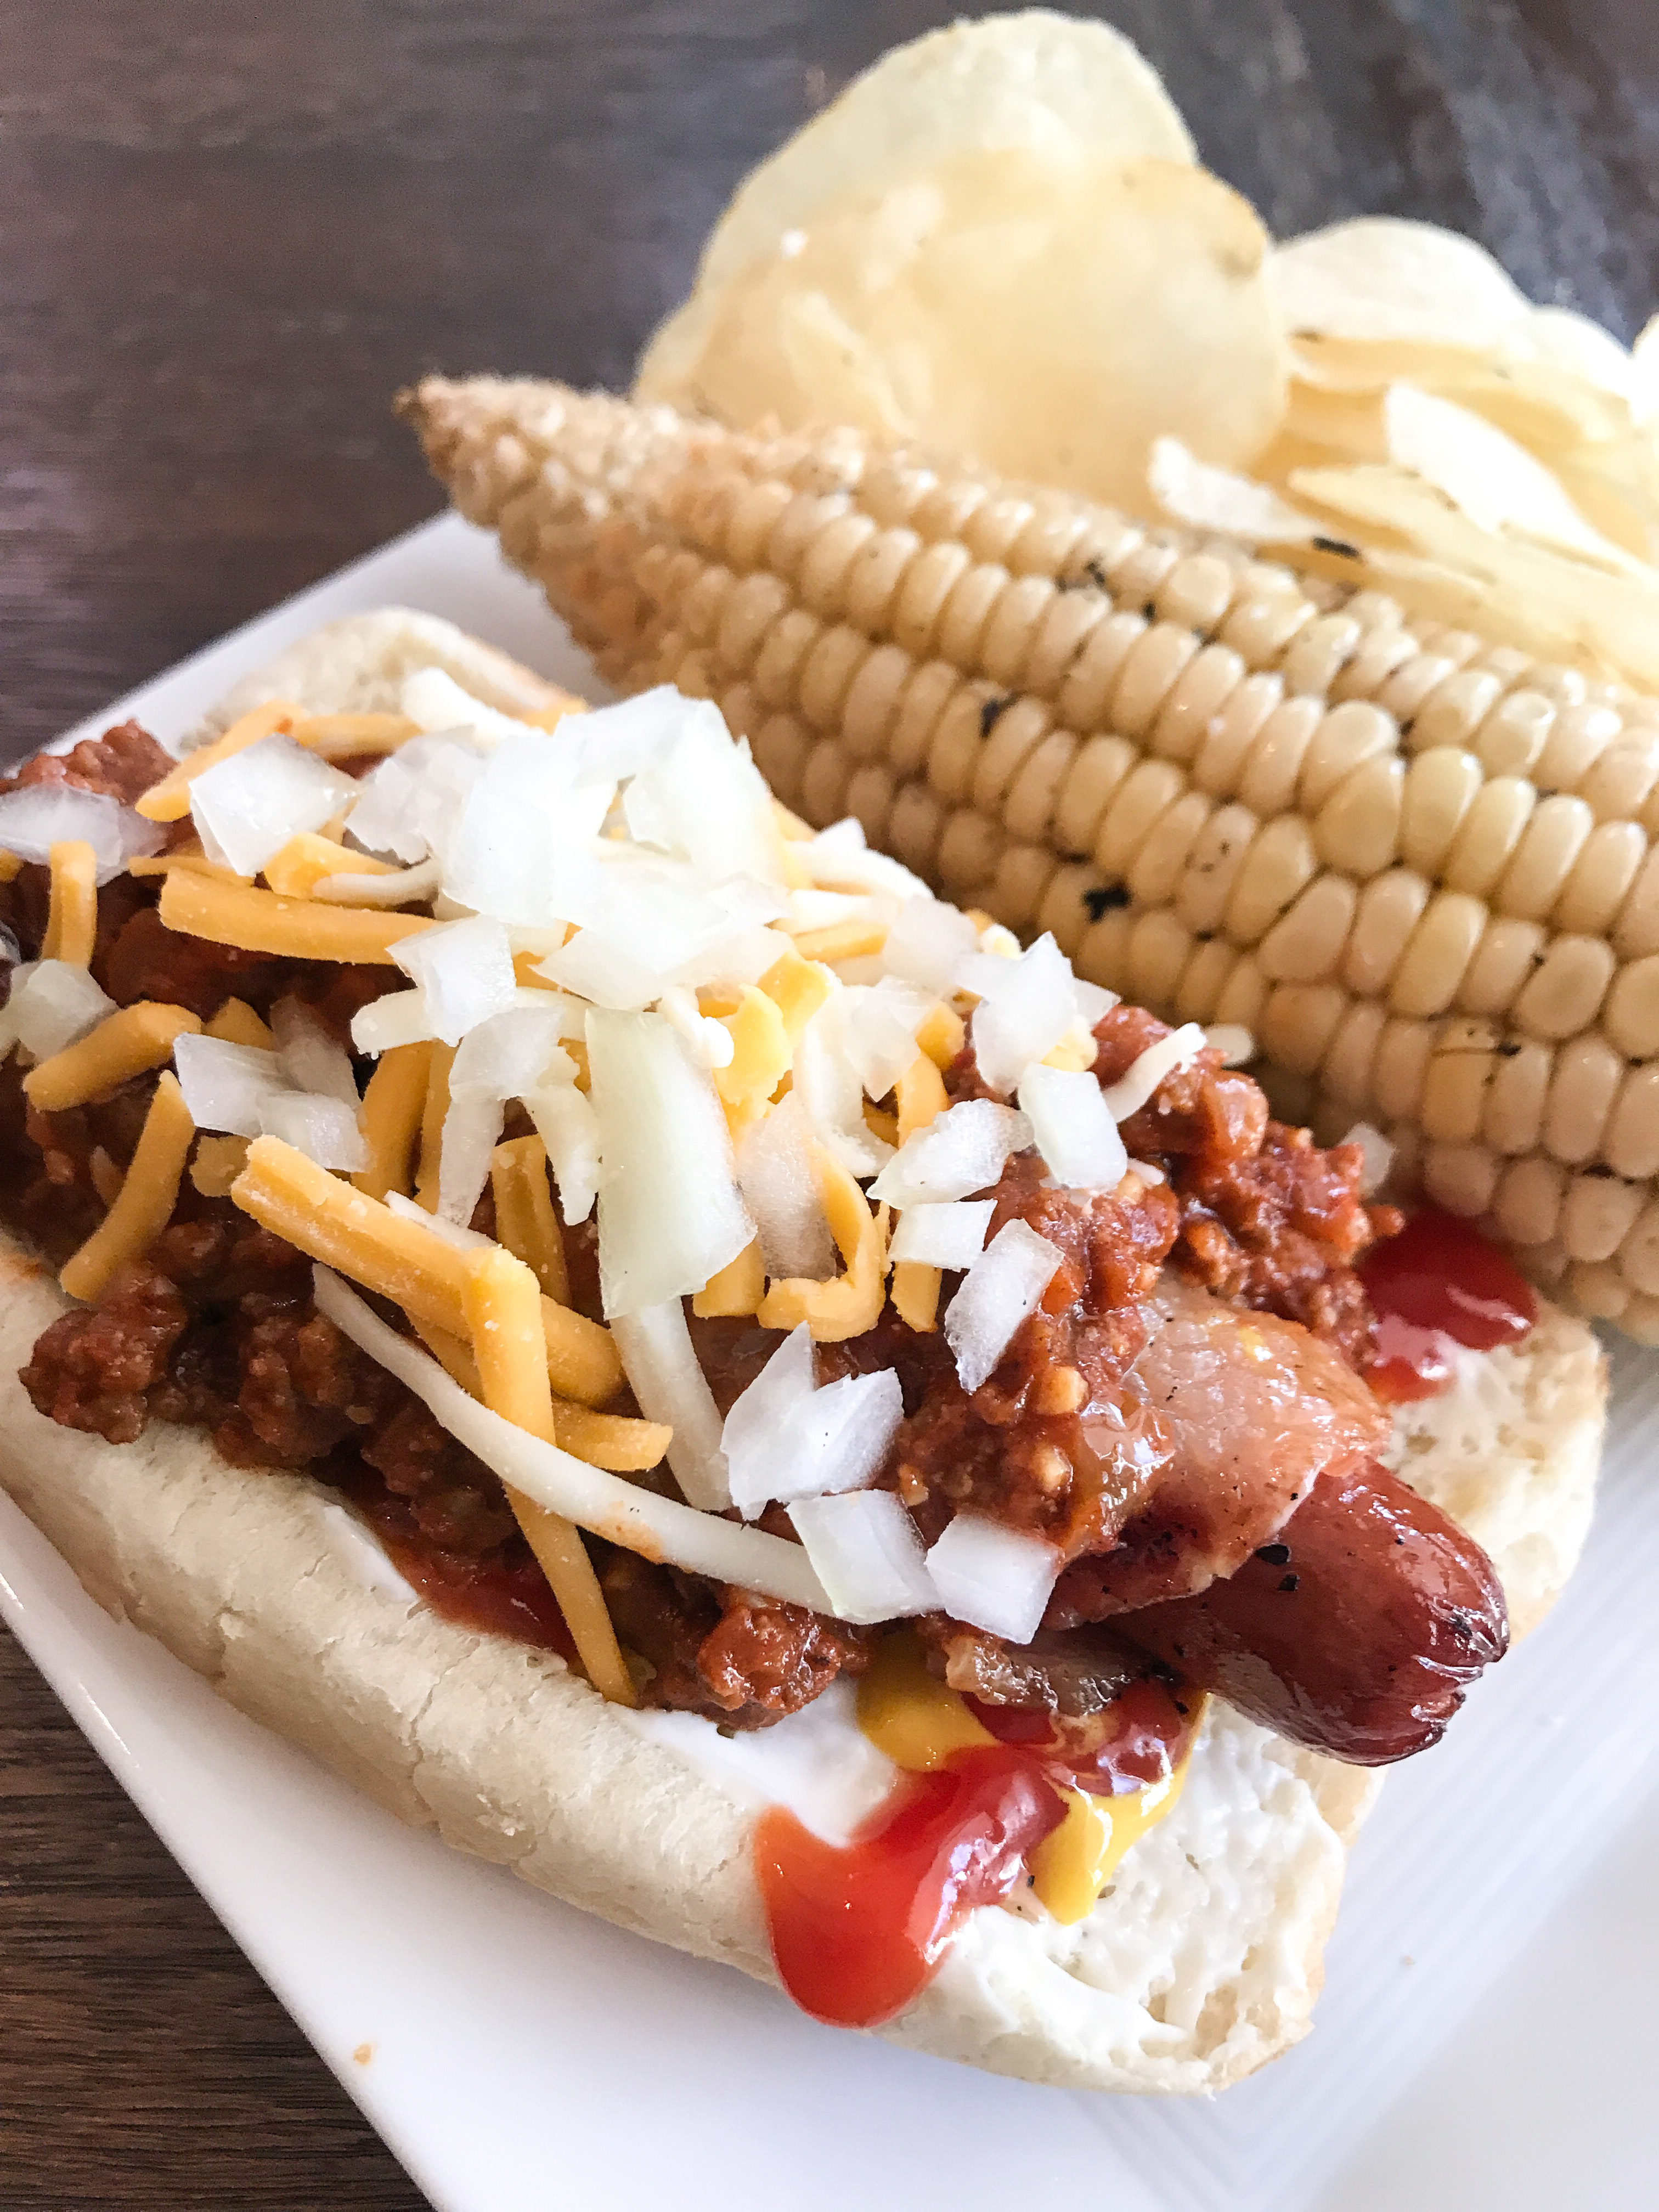 The best bacon wrapped chili dog recipe